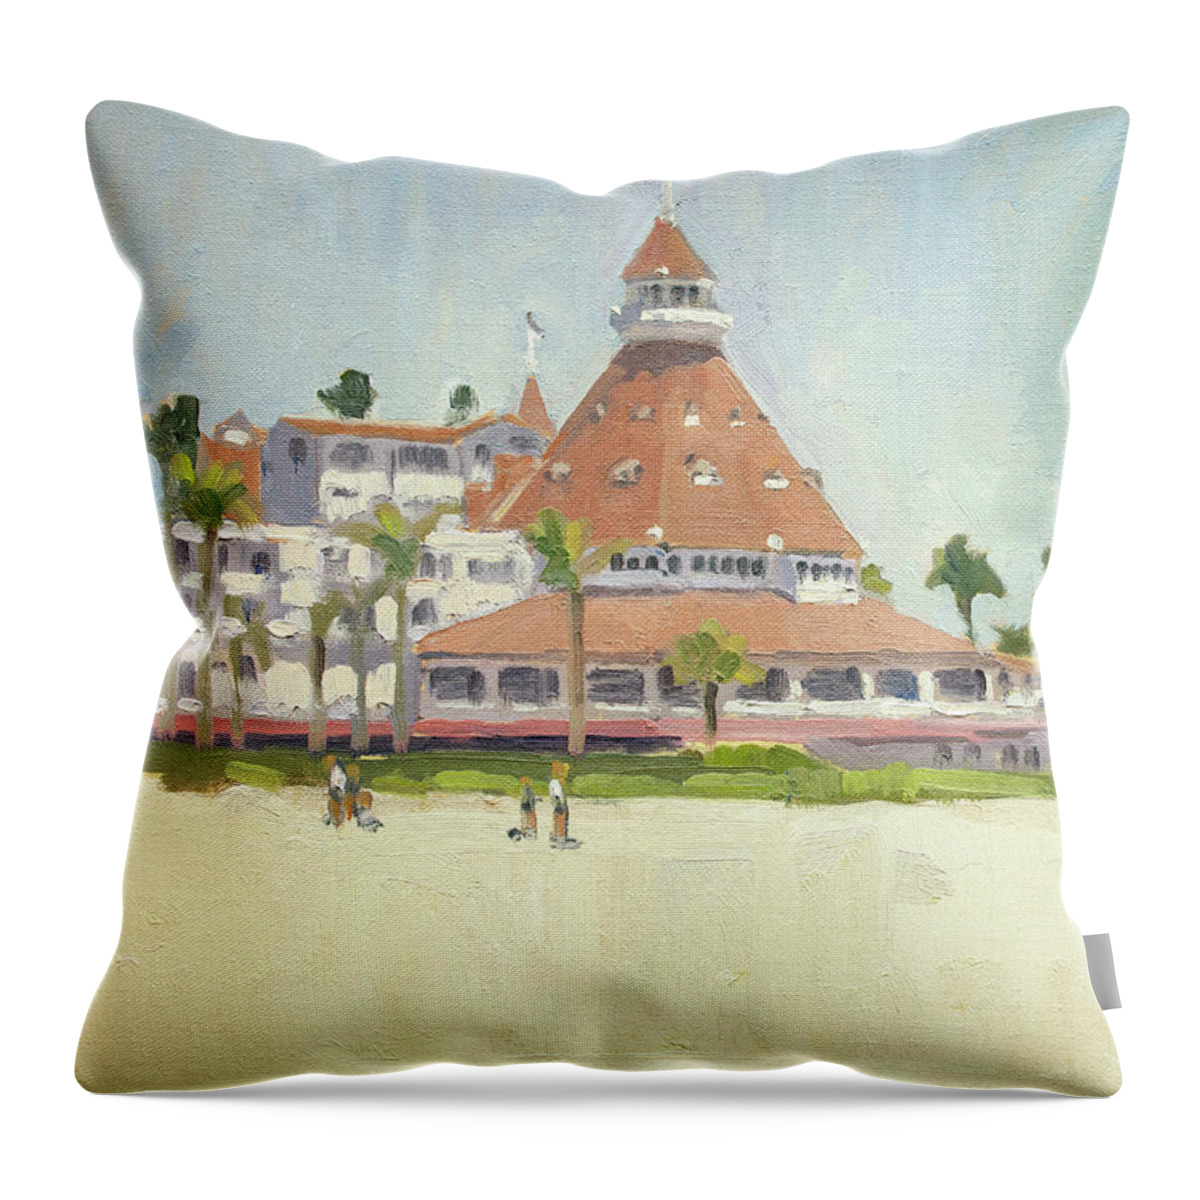 Hotel Del Coronado Throw Pillow featuring the painting Hotel Del Coronado Beach - Coronado, San Diego, California by Paul Strahm